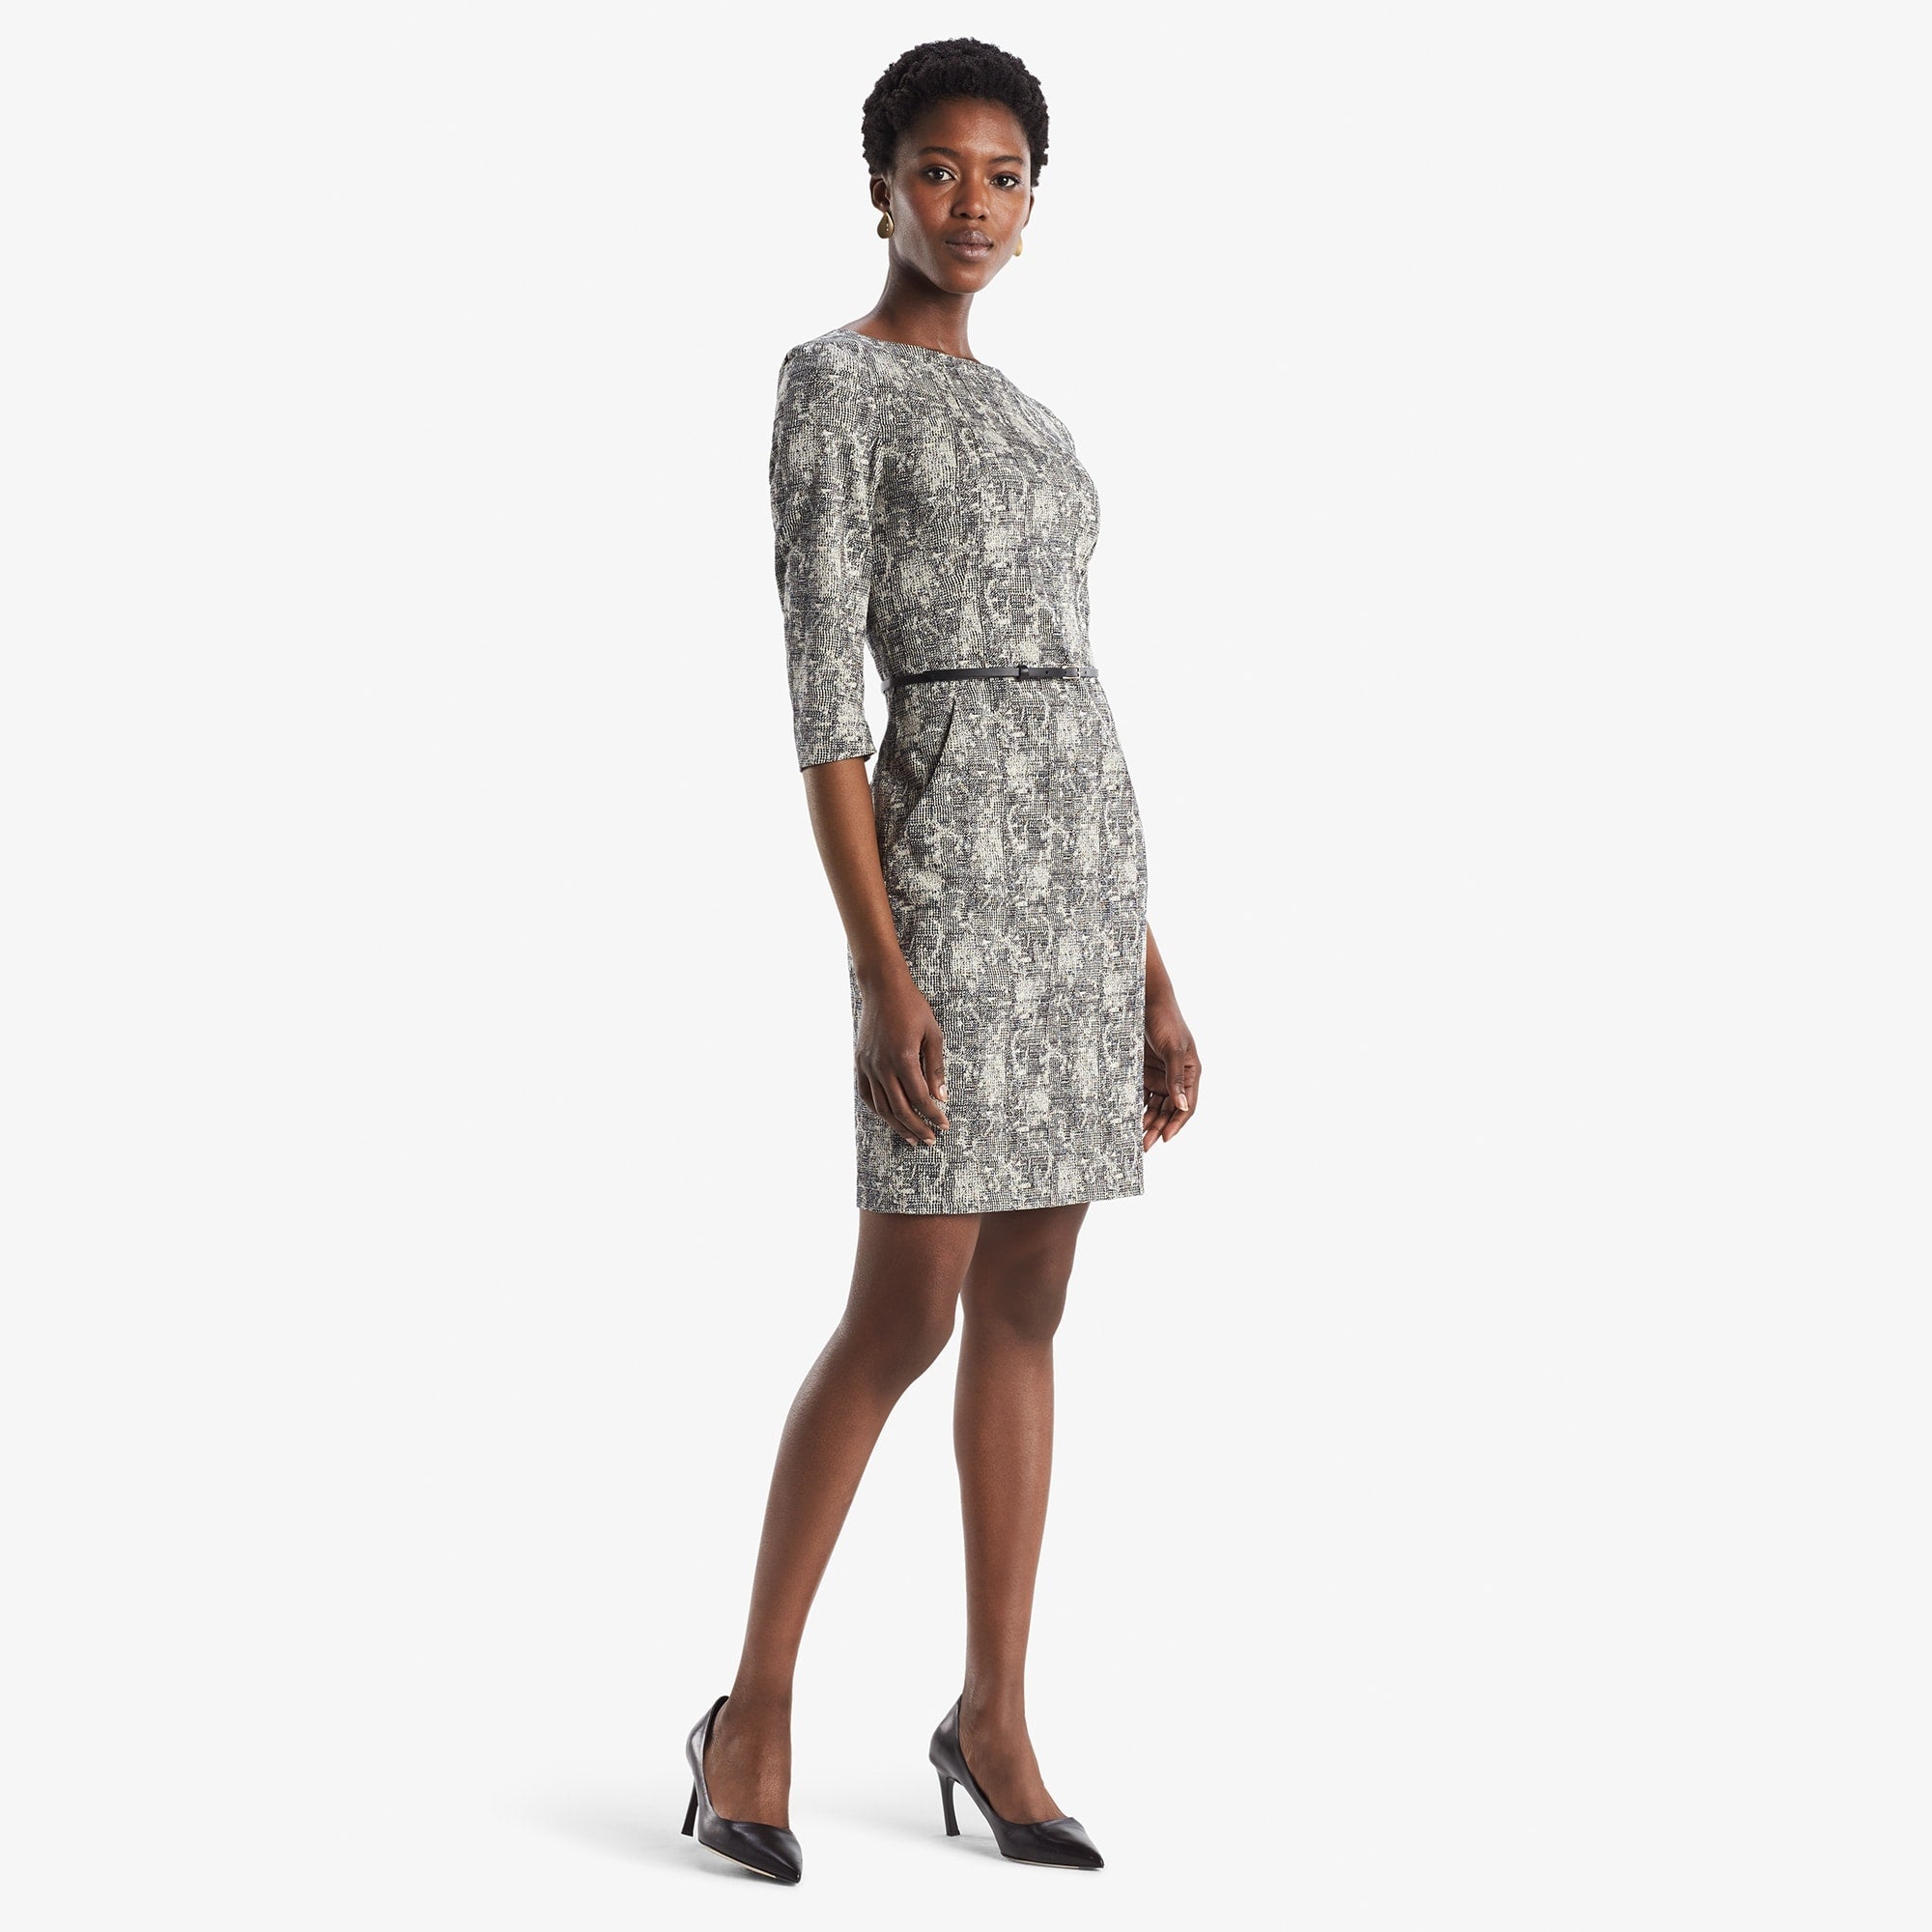 Front image of a woman standing wearing the Etsuko dress in crackle